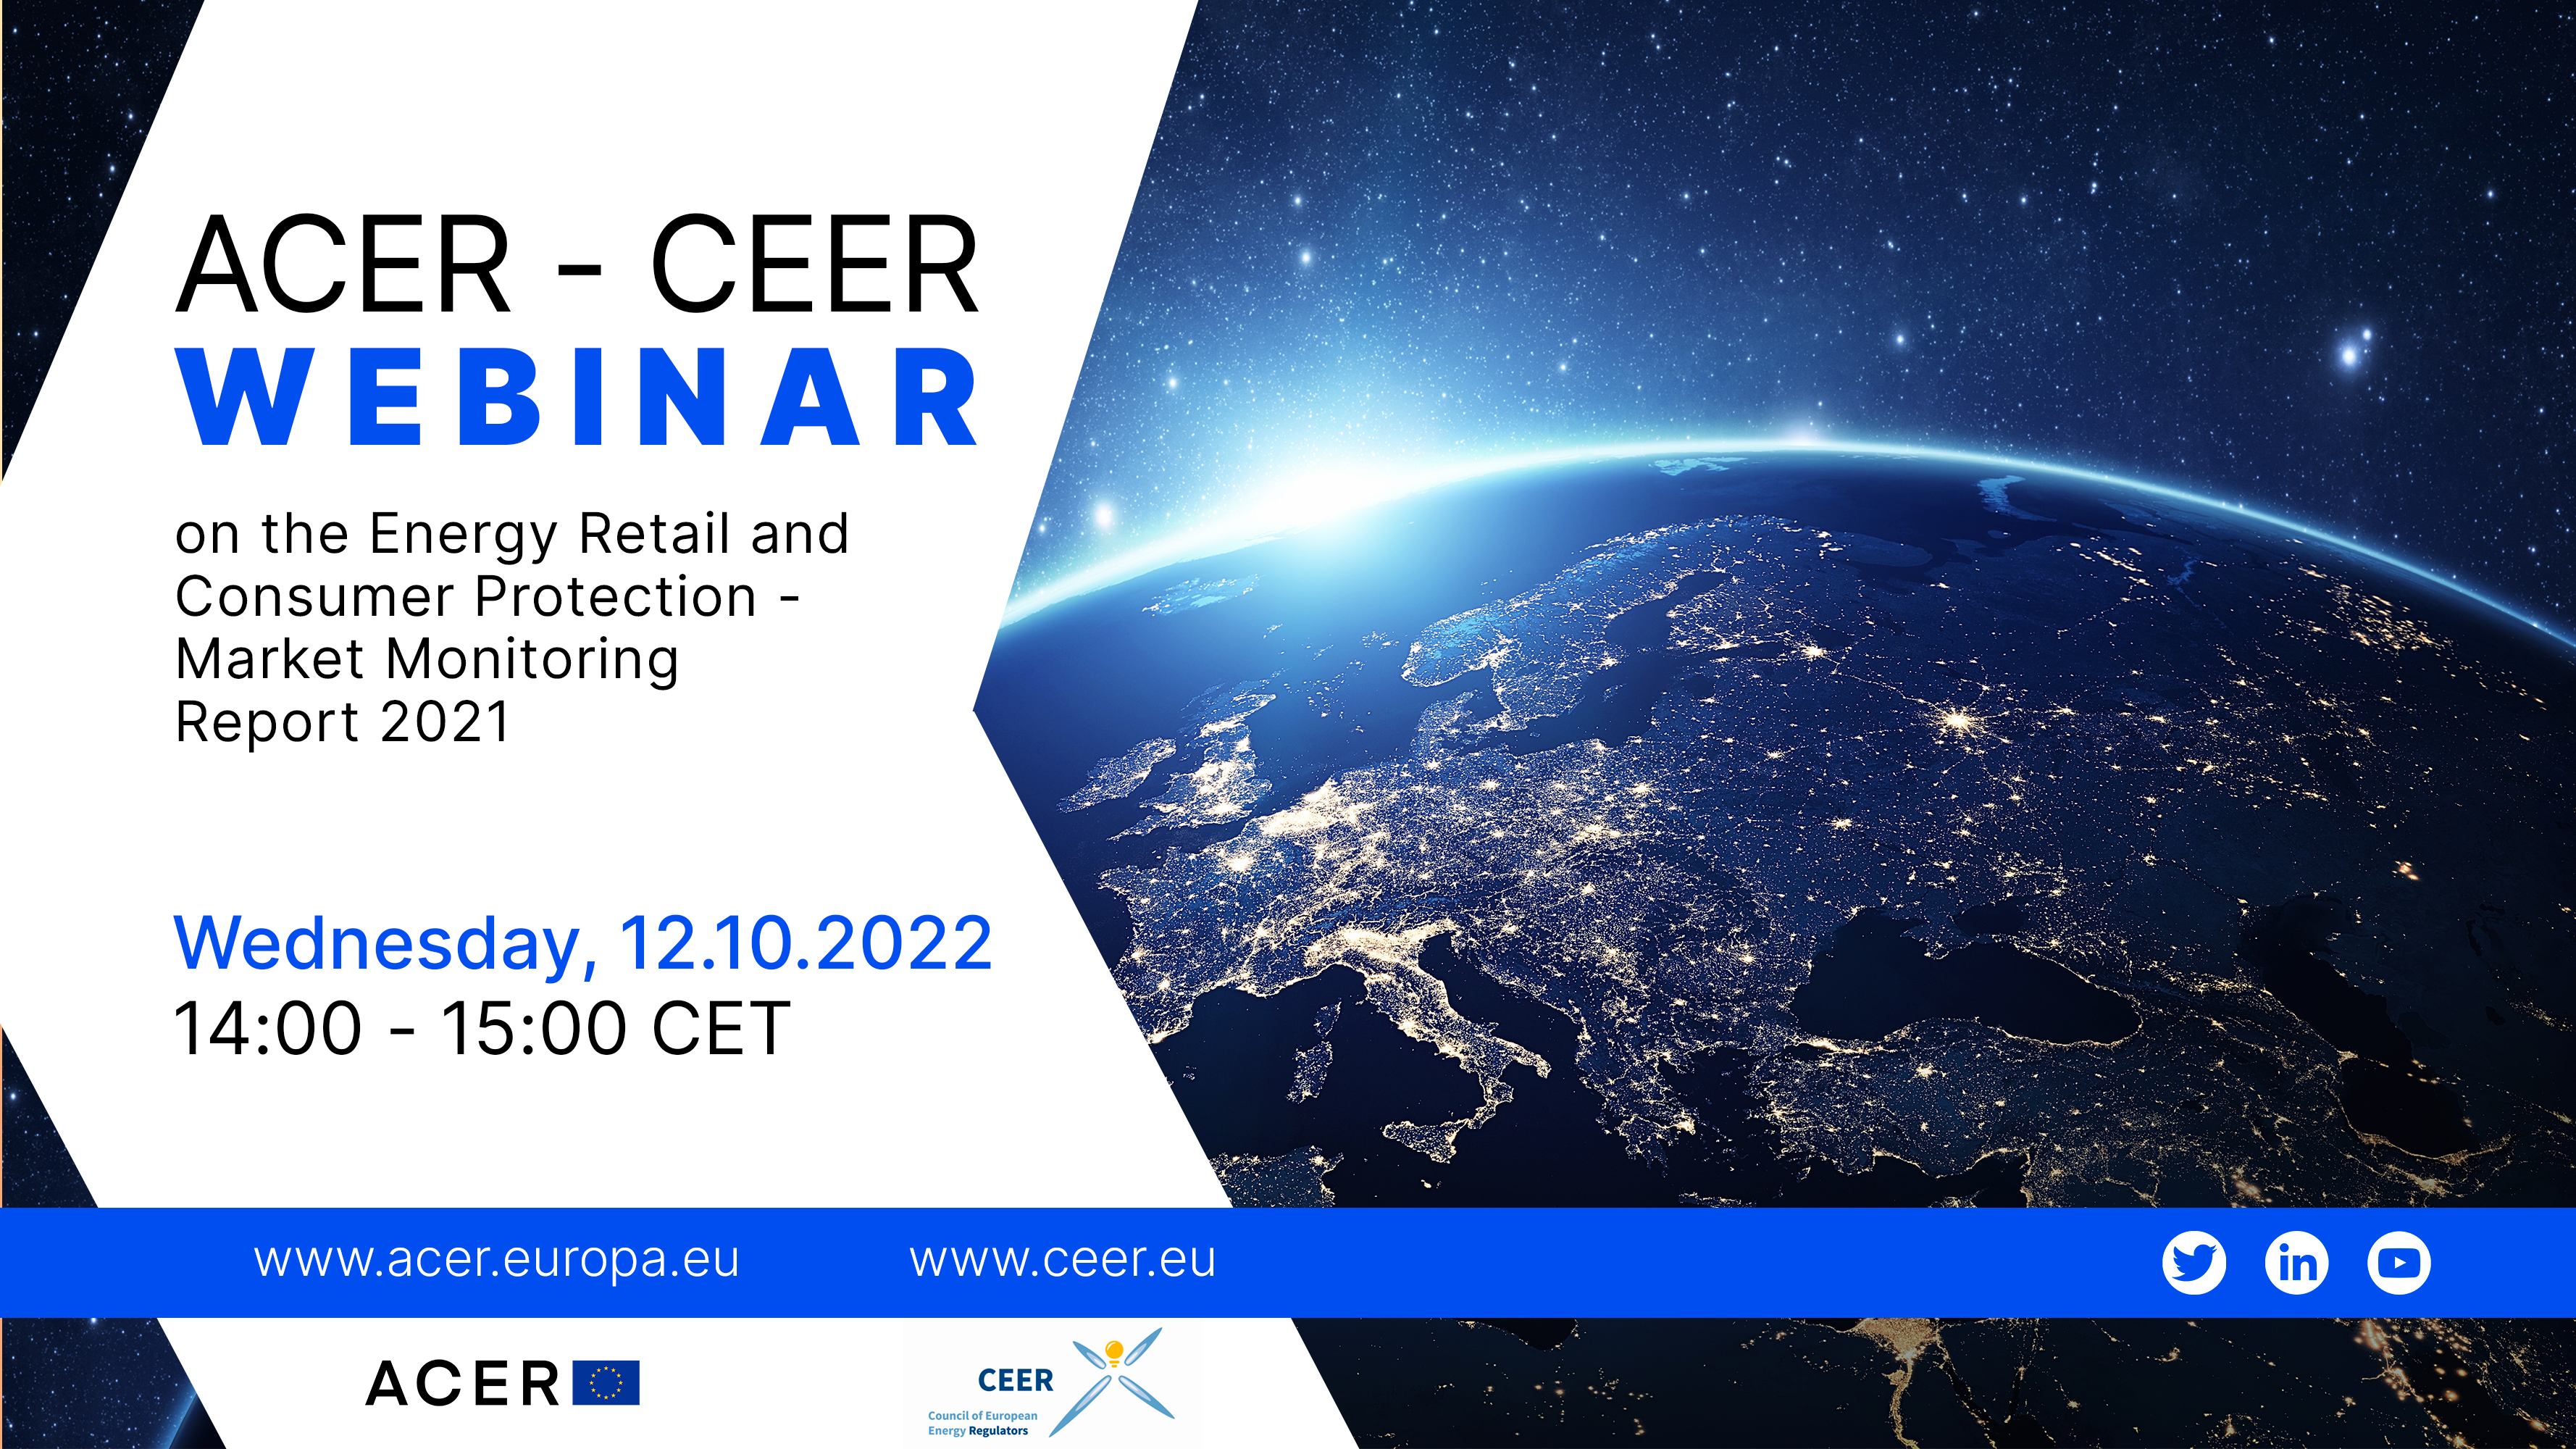 ACER-CEER Webinar on the Energy Retail and Consumer Protection Market Monitoring Report 